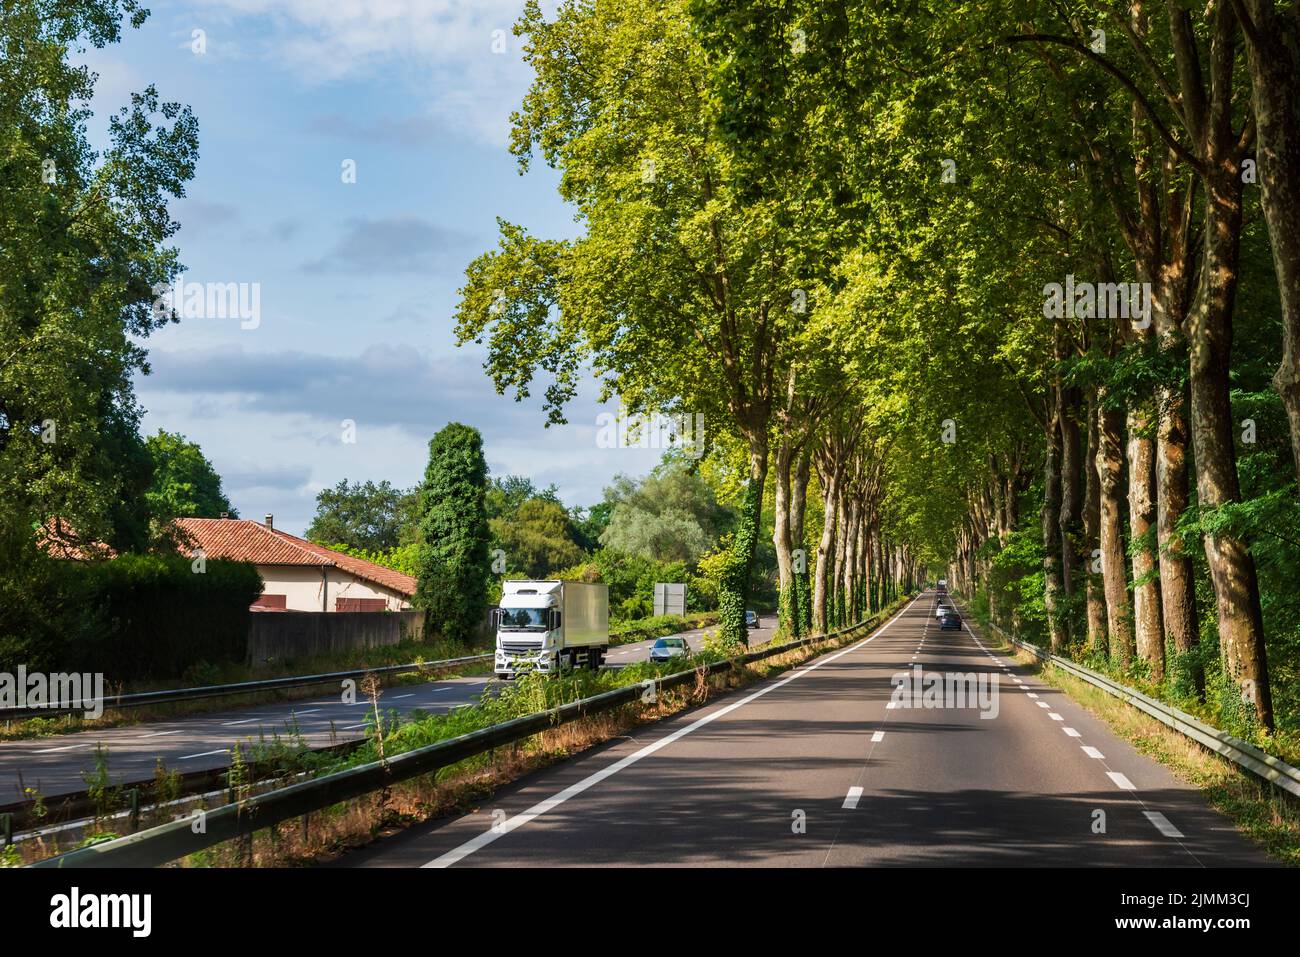 Straight road with two rows of trees on its edges and several vehicles circulating along it, creating a vanishing point. Stock Photo